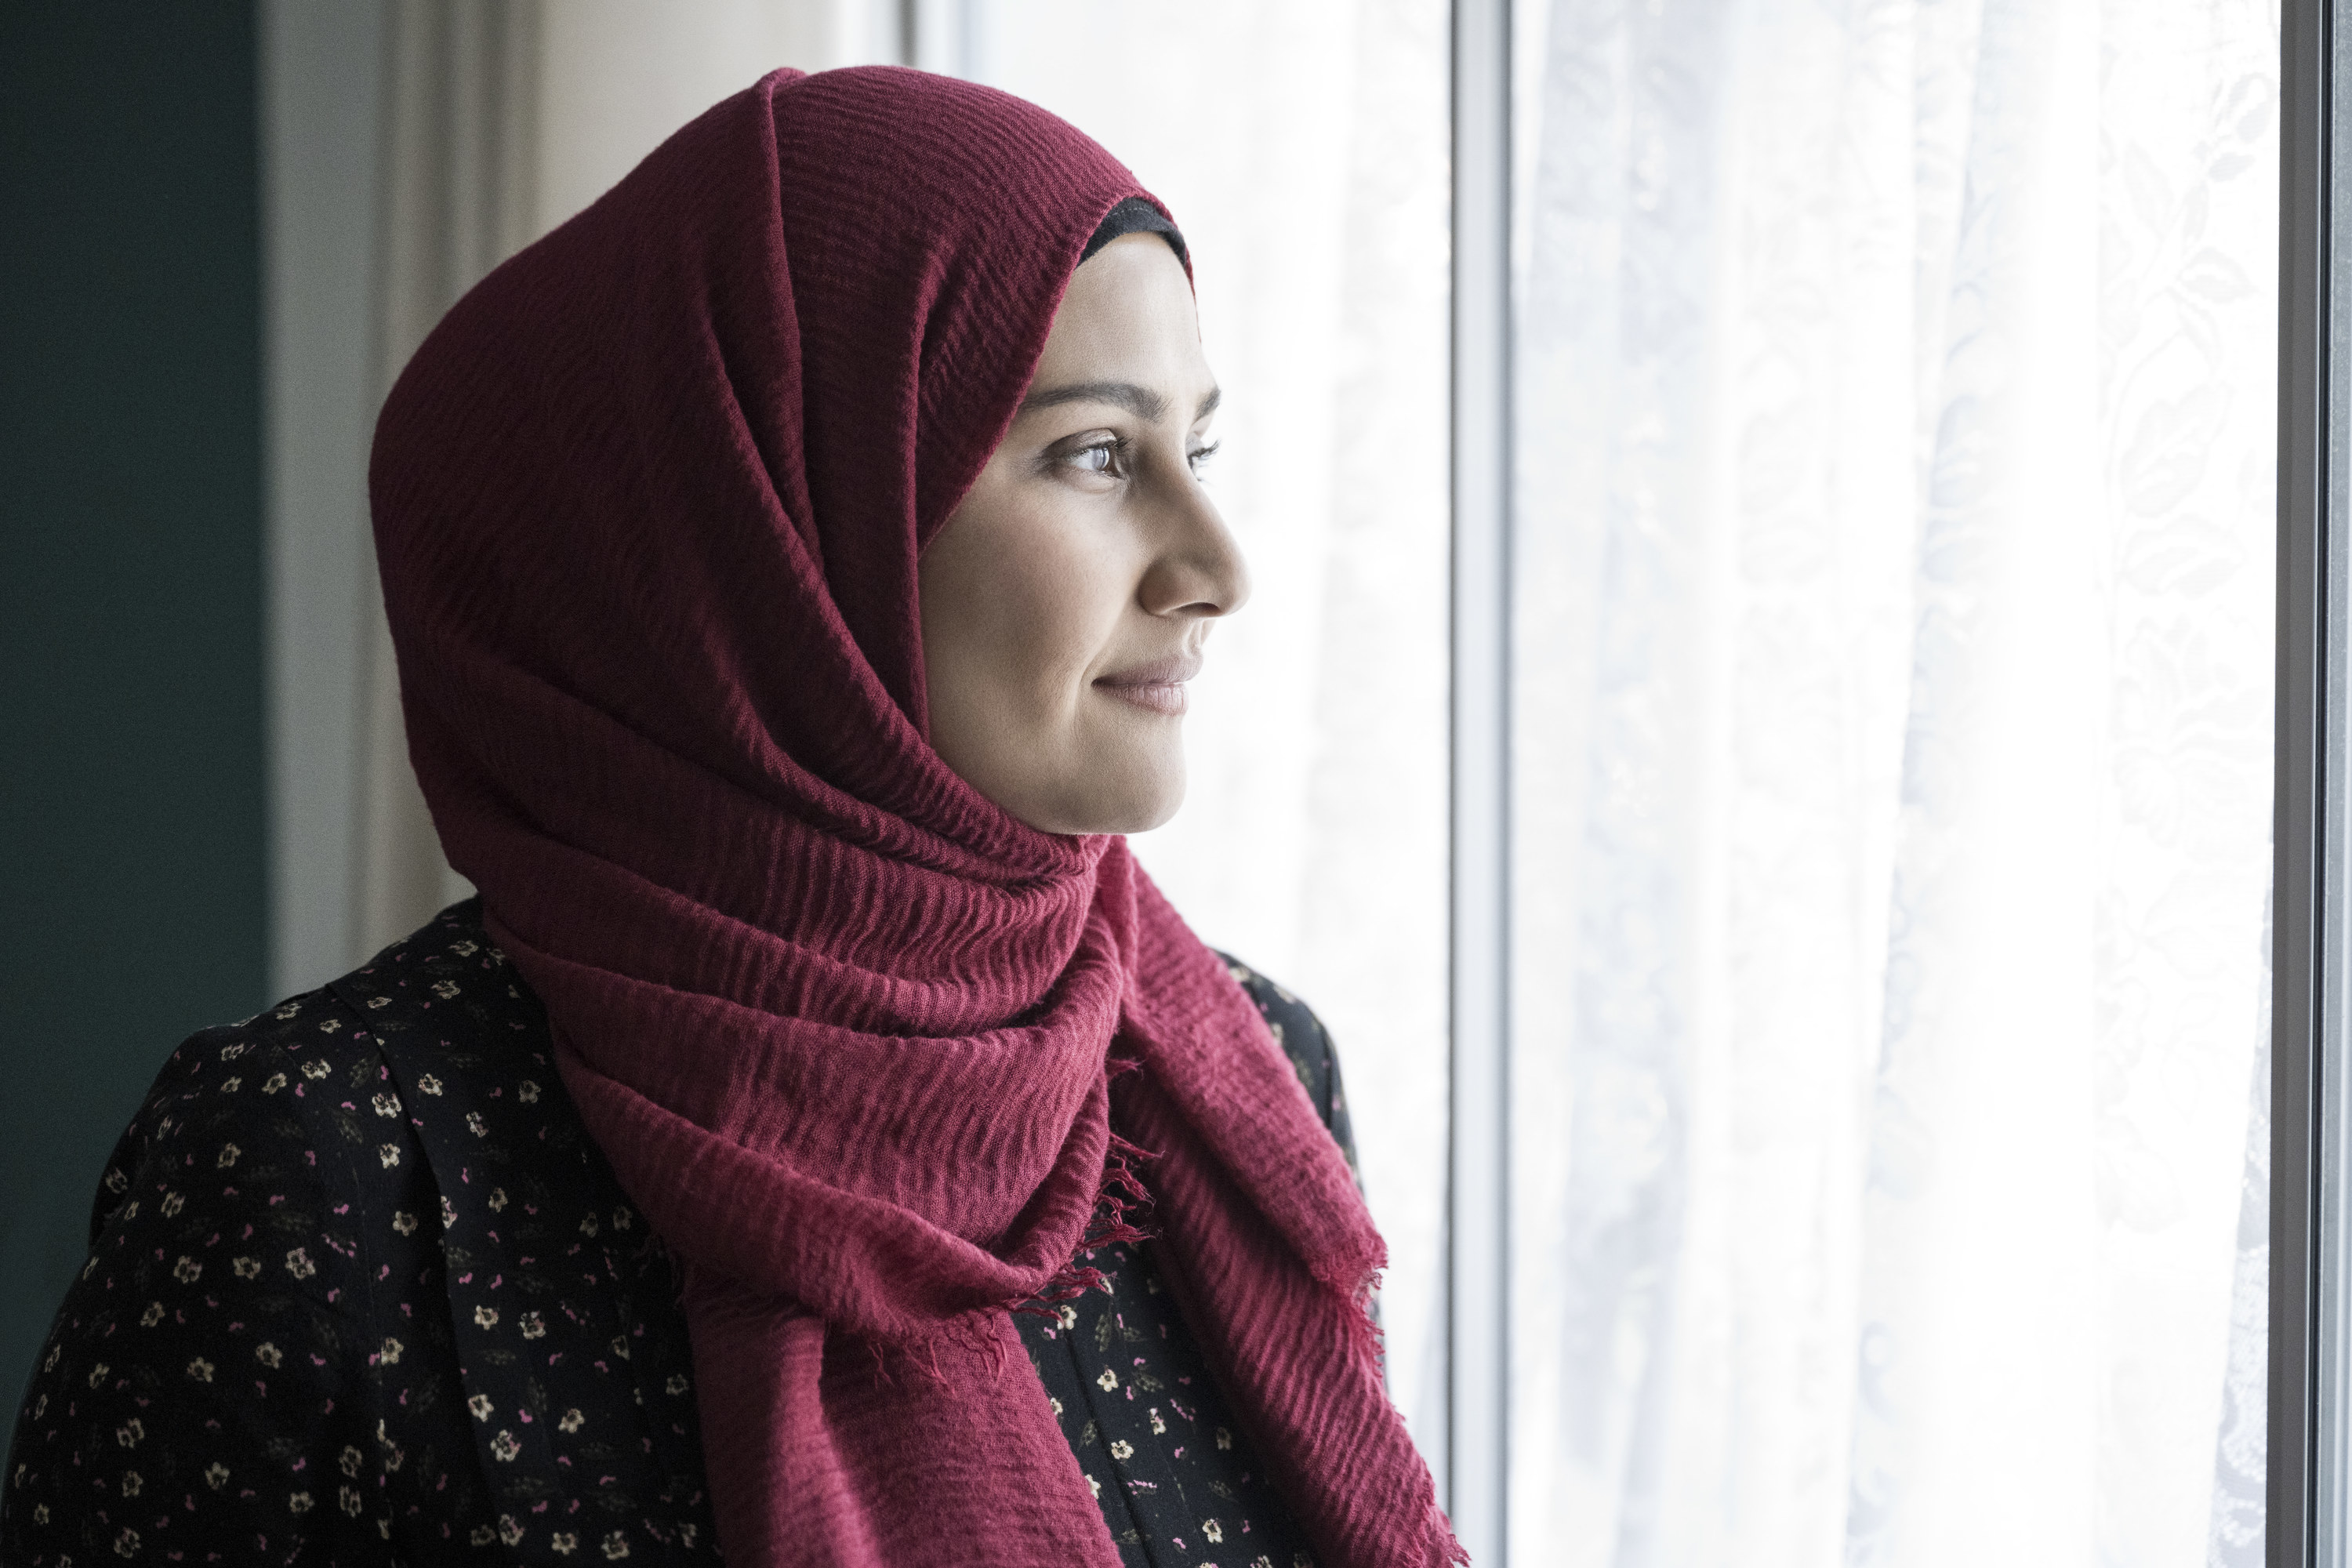 Woman wearing a head scarf looking out the window